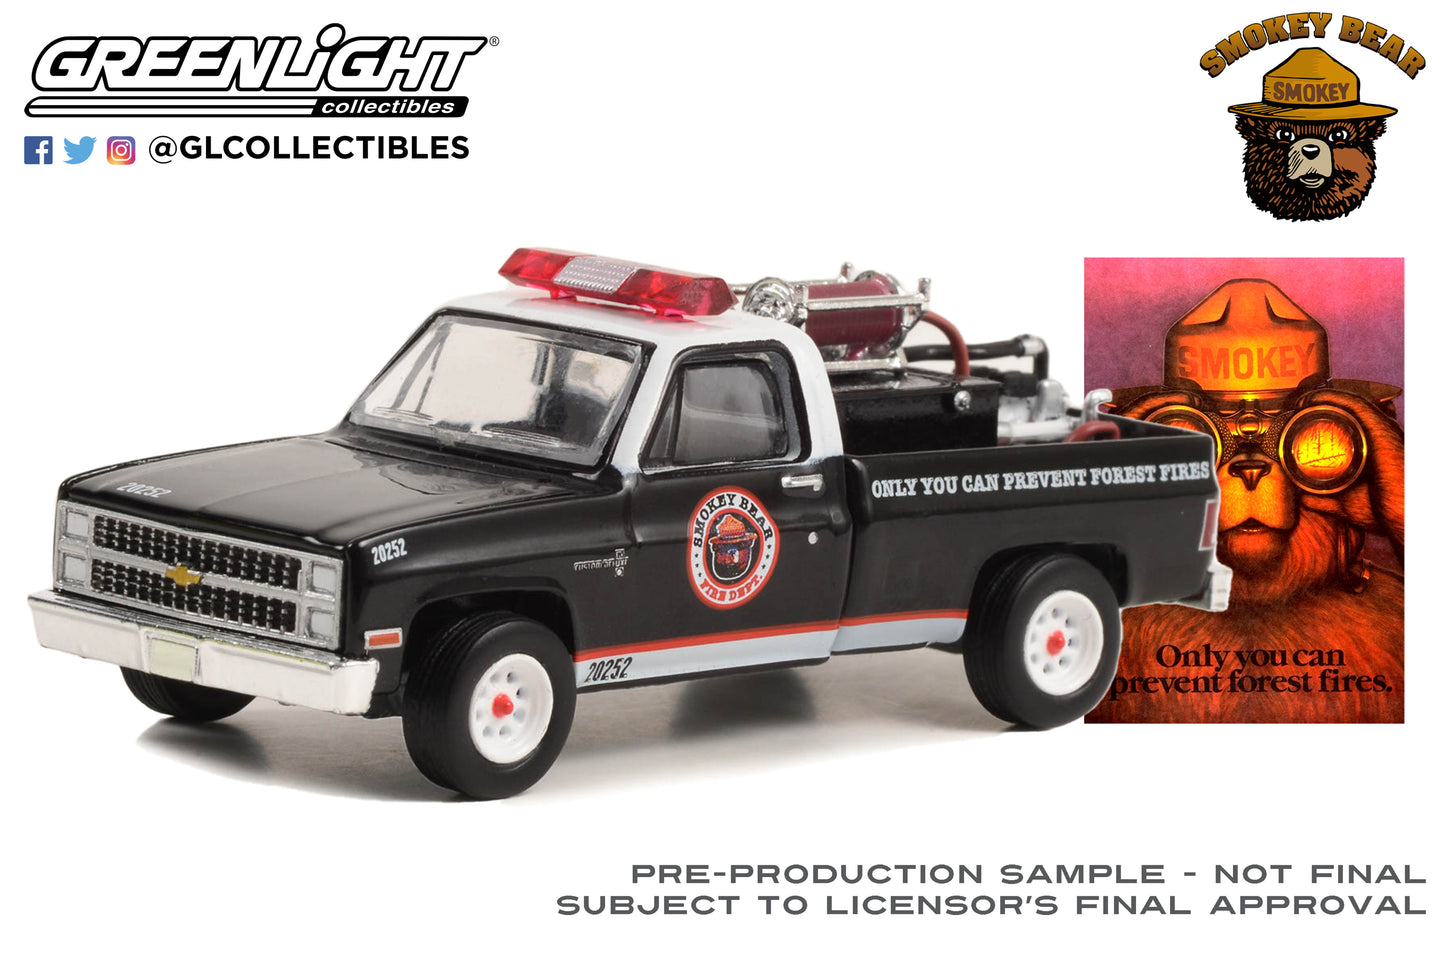 GreenLight 1:64 Smokey Bear Series 2 - 1982 Chevrolet C20 Custom Deluxe with Fire Equipment, Hose and Tank “Only You Can Prevent Forest Fires” 38040-C